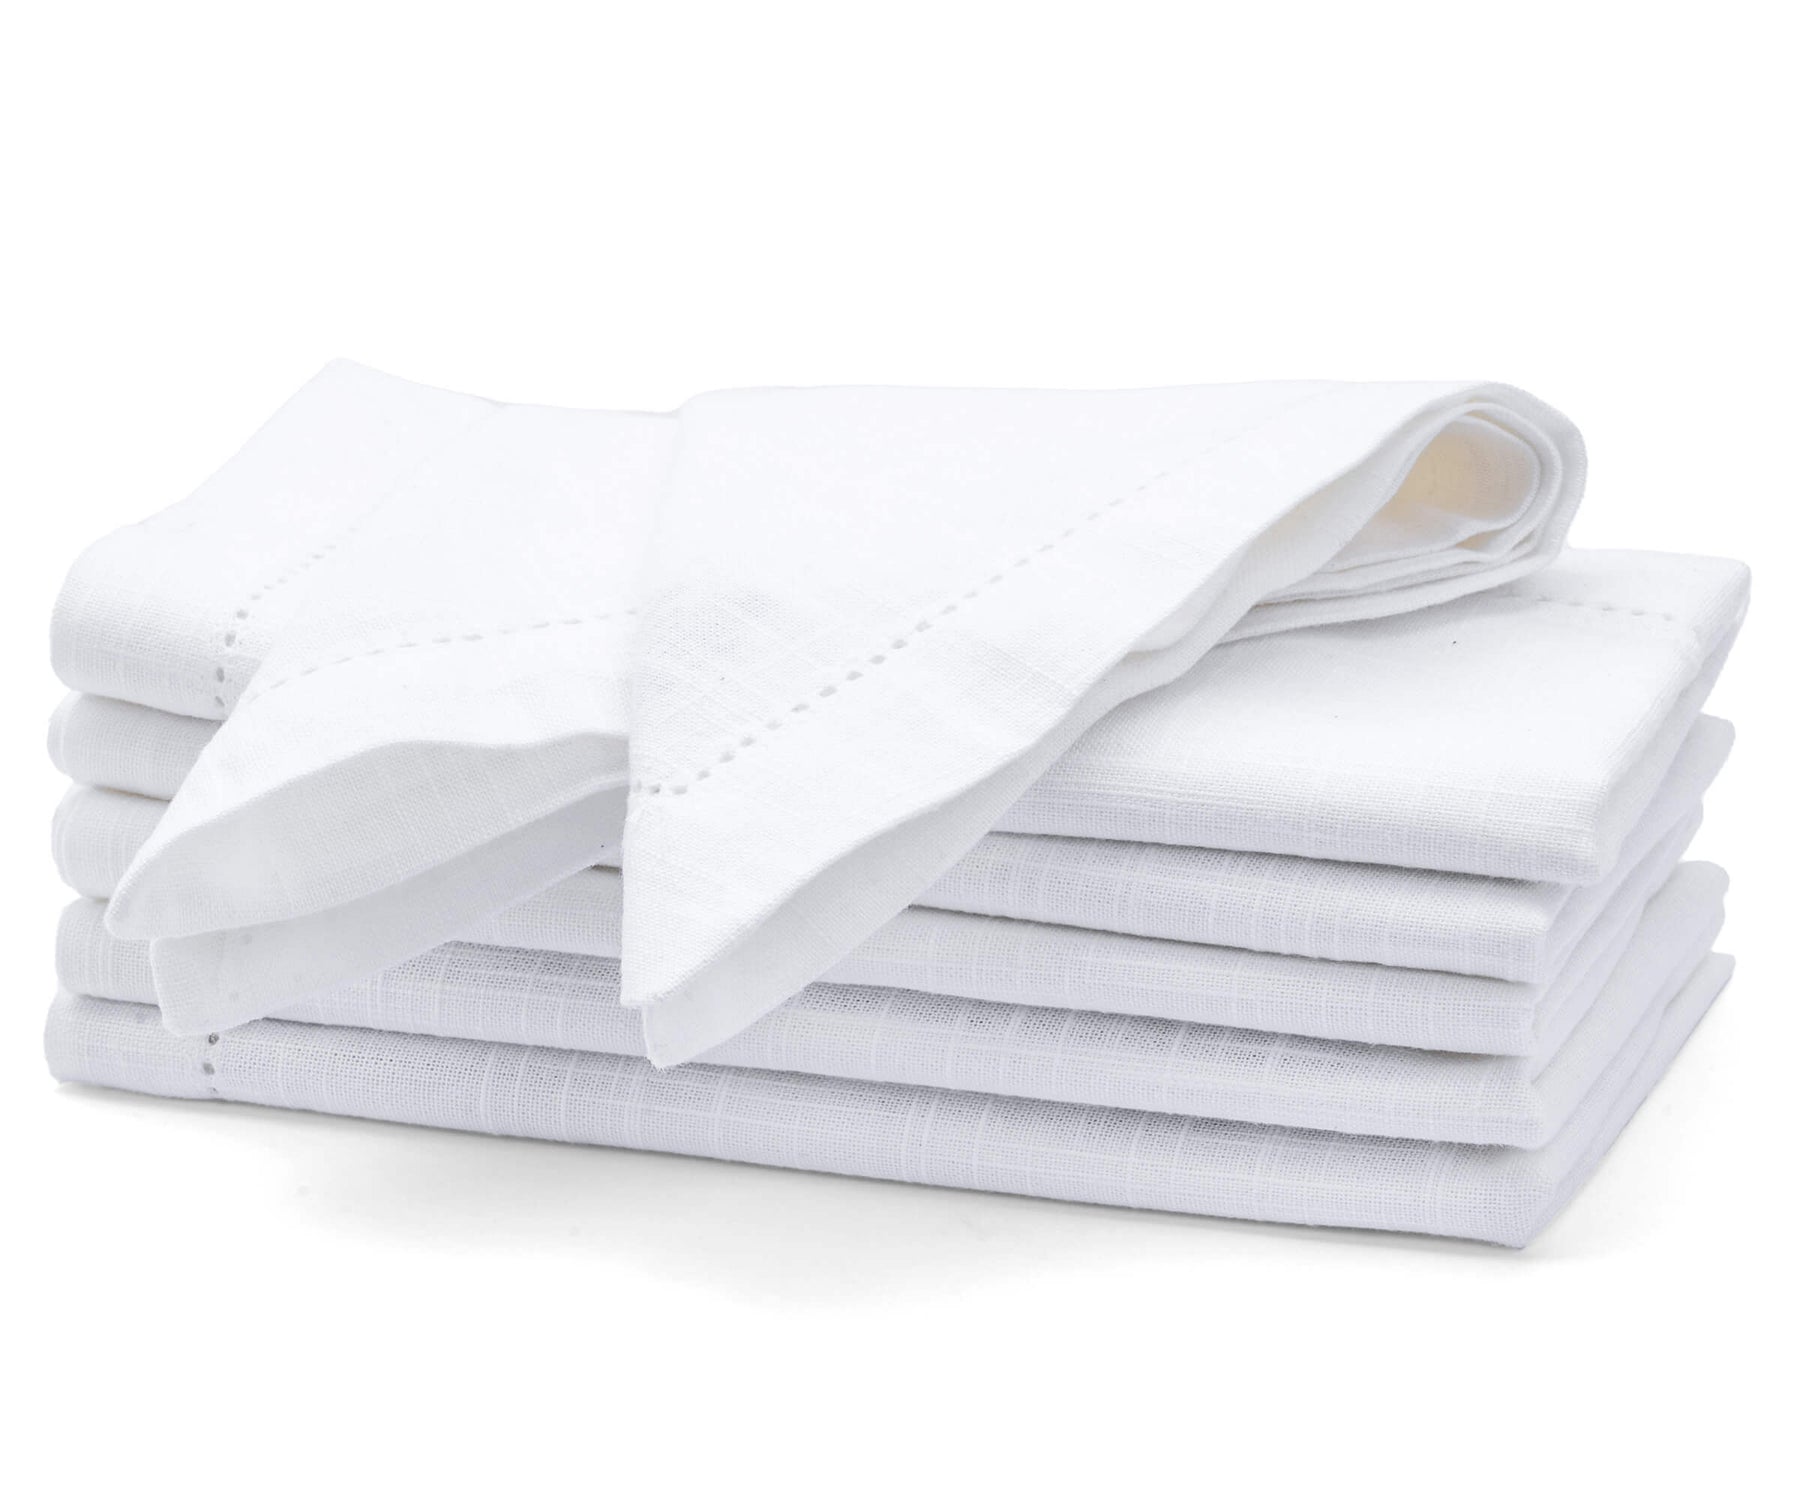 White linen napkins of size 18x18", linen napkins set of 6 are with borders arranged one above another.